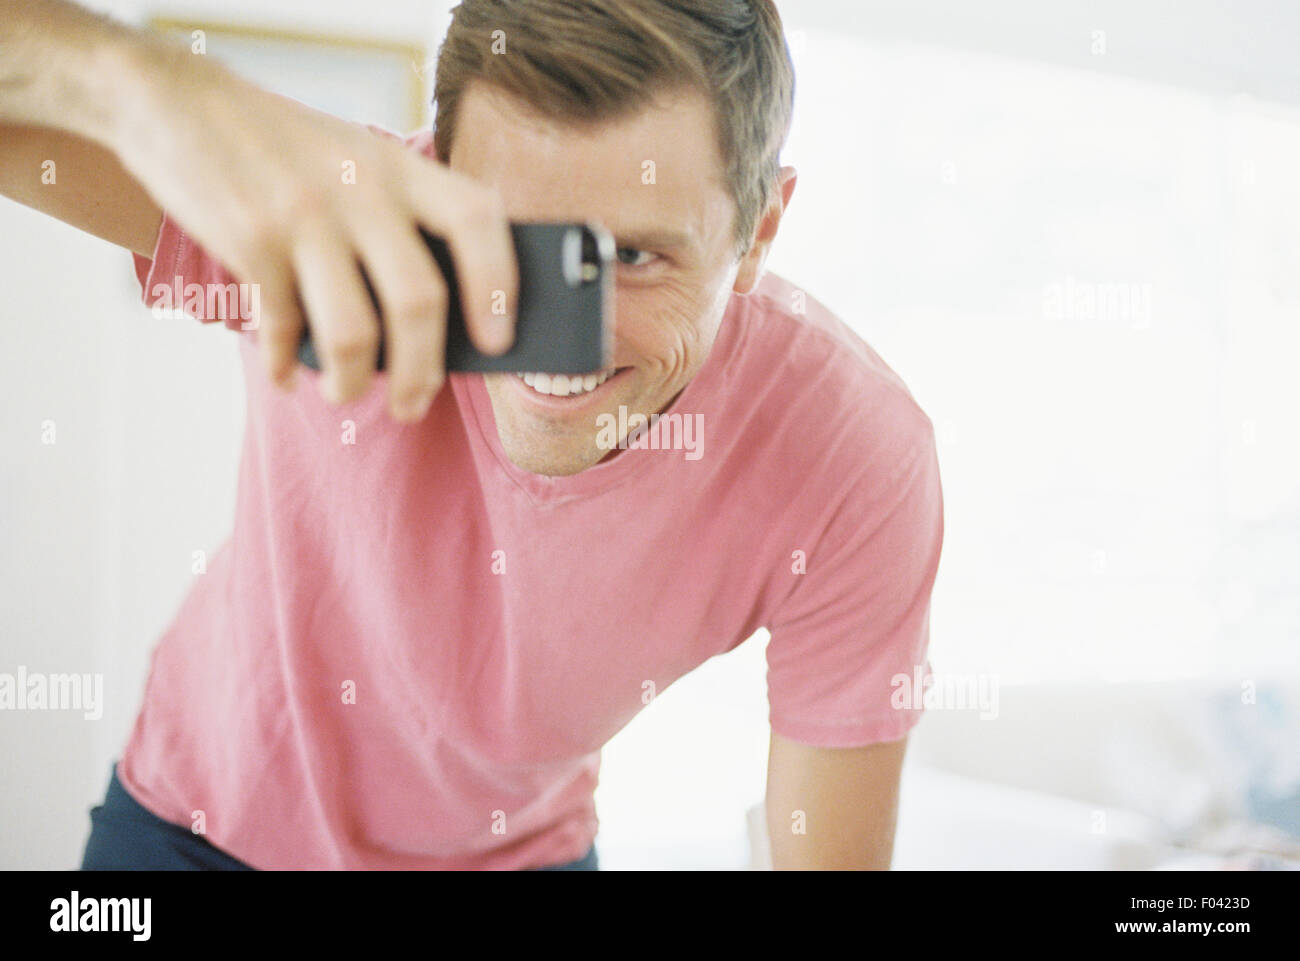 Smiling man taking a picture with a smart phone. Stock Photo